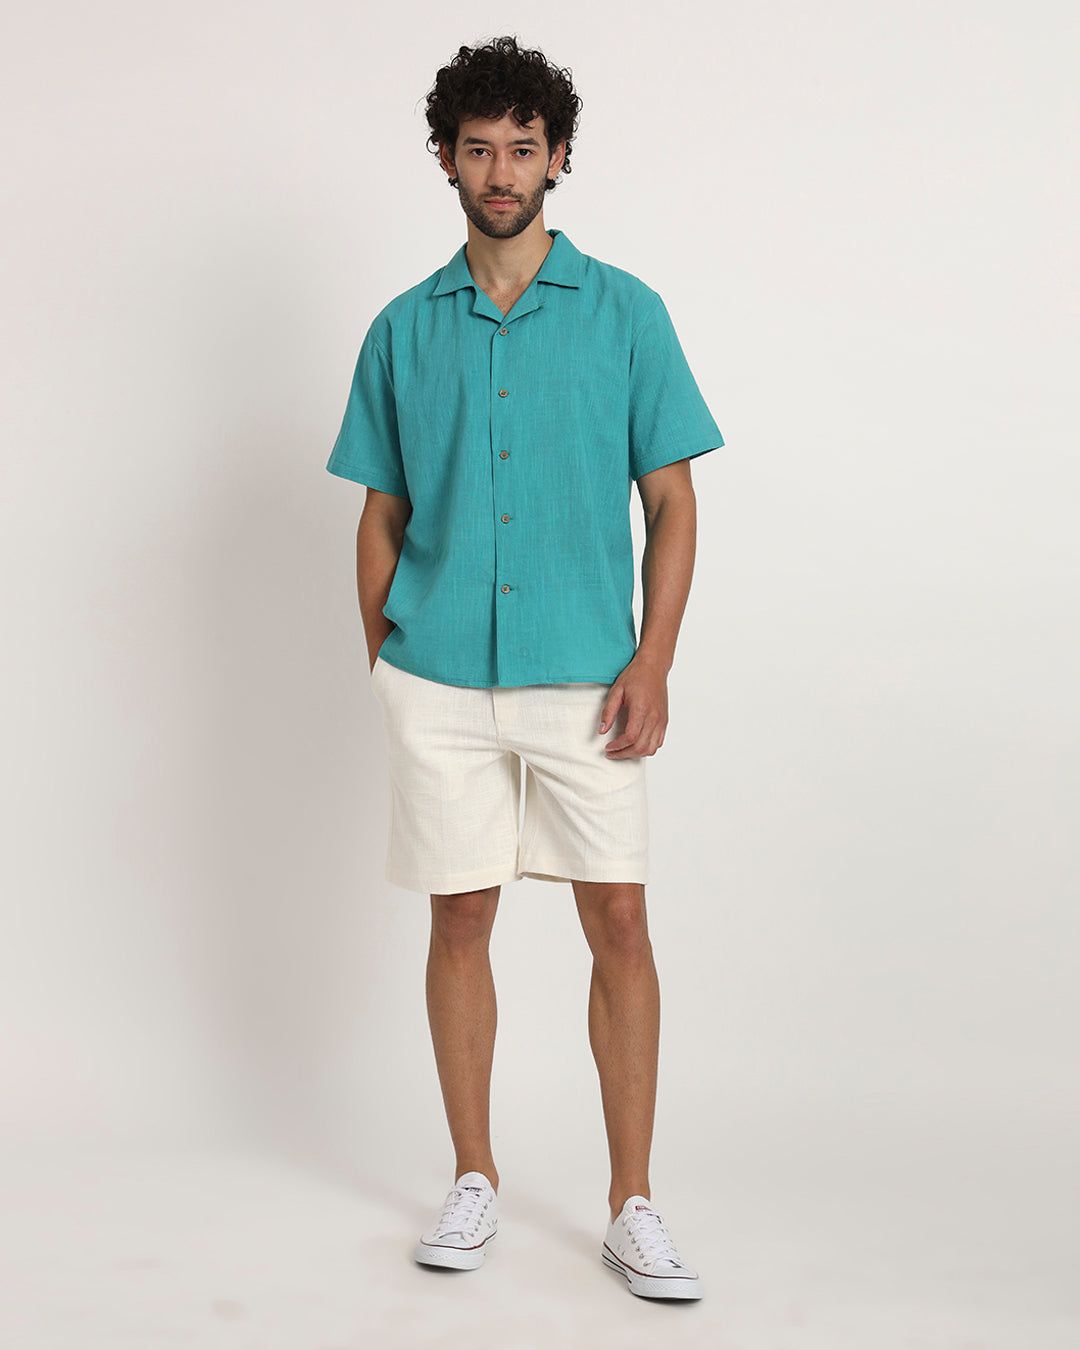 Ready For Anything White Men's Shorts